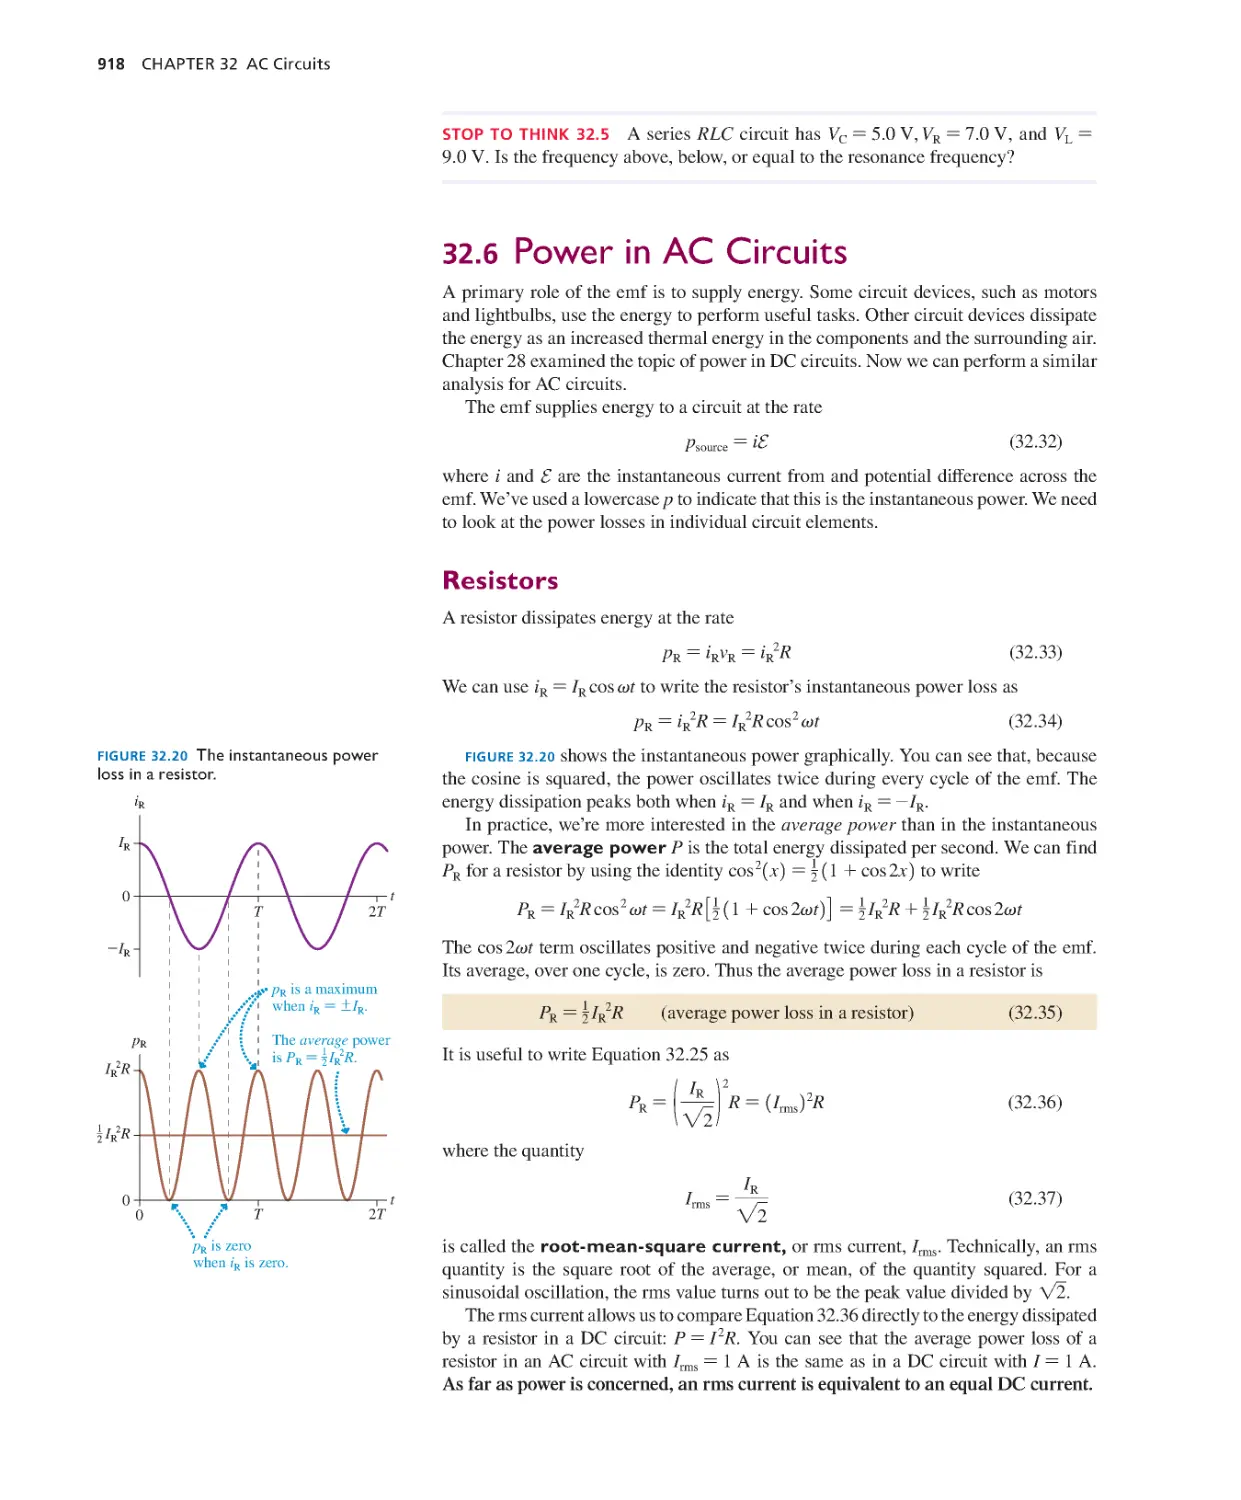 32.6. Power in AC Circuits